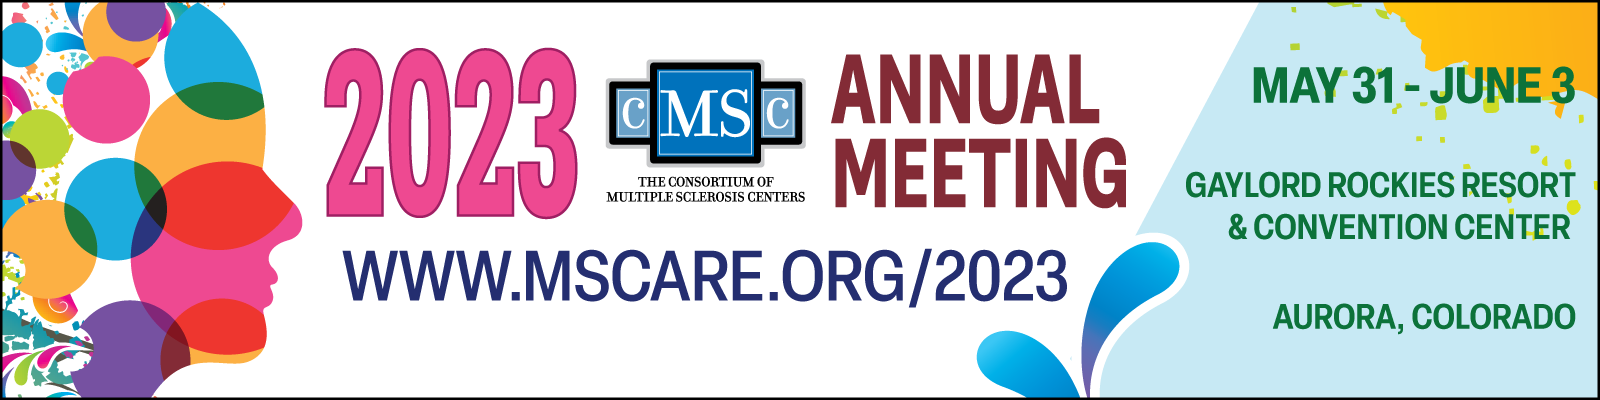 2023 Annual Meeting of the Consortium of Multiple Sclerosis Centers